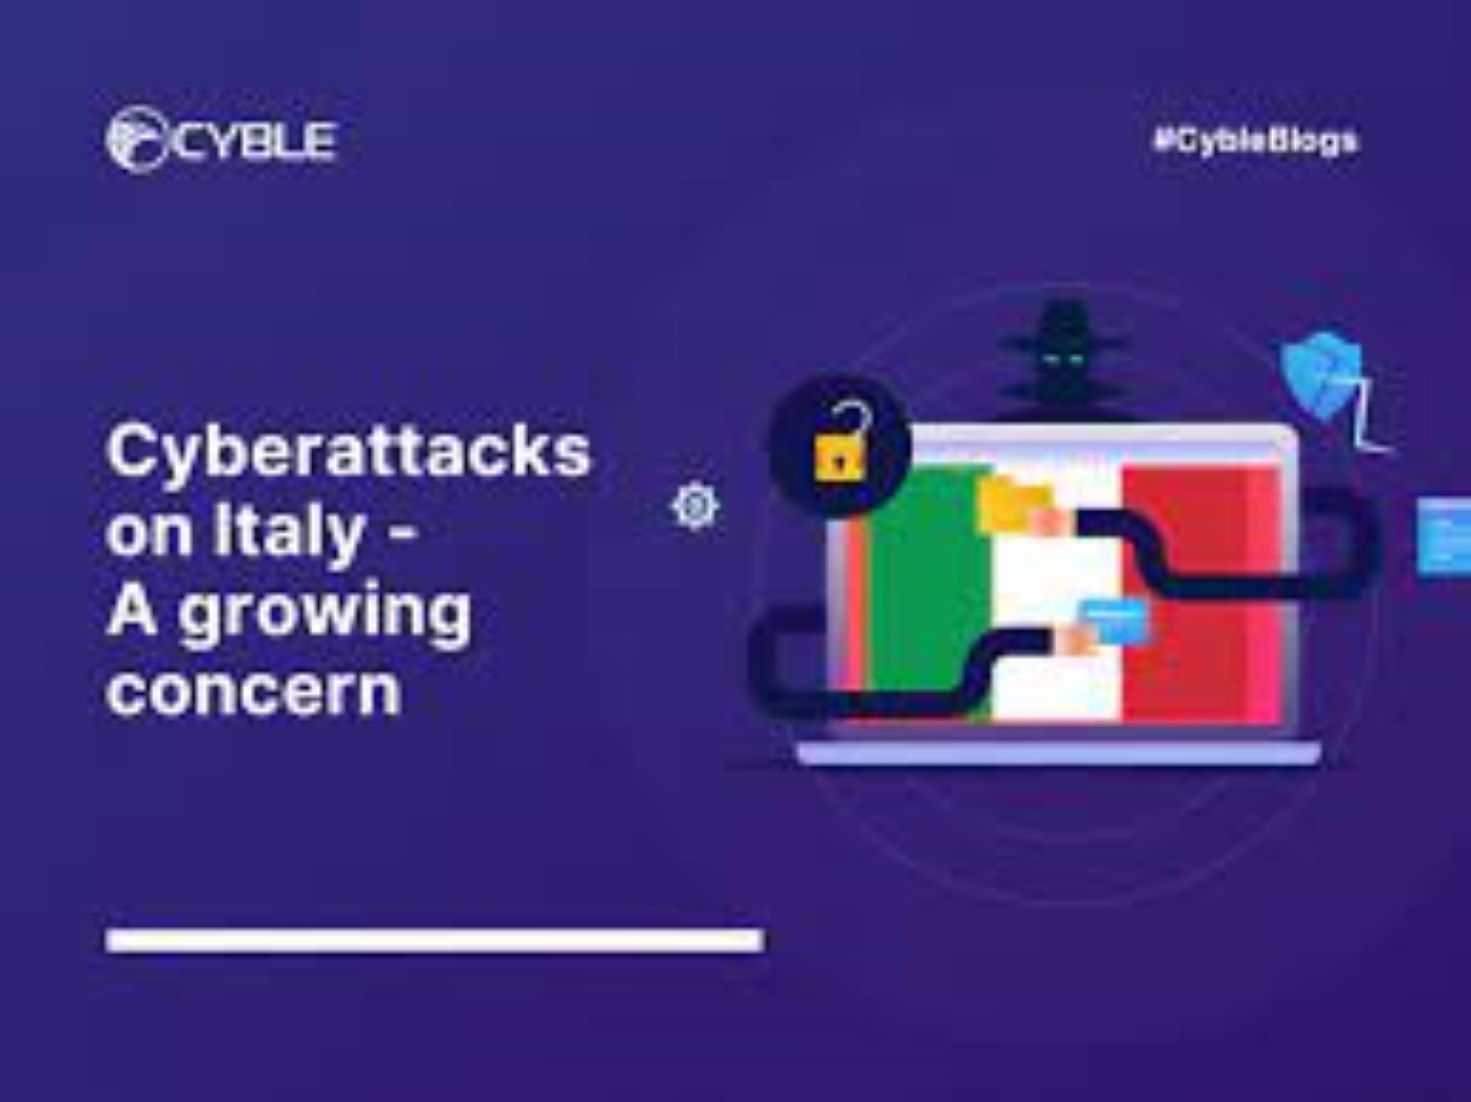 Italy Suffered Over 1,400 Cyberattacks Last Year: Official